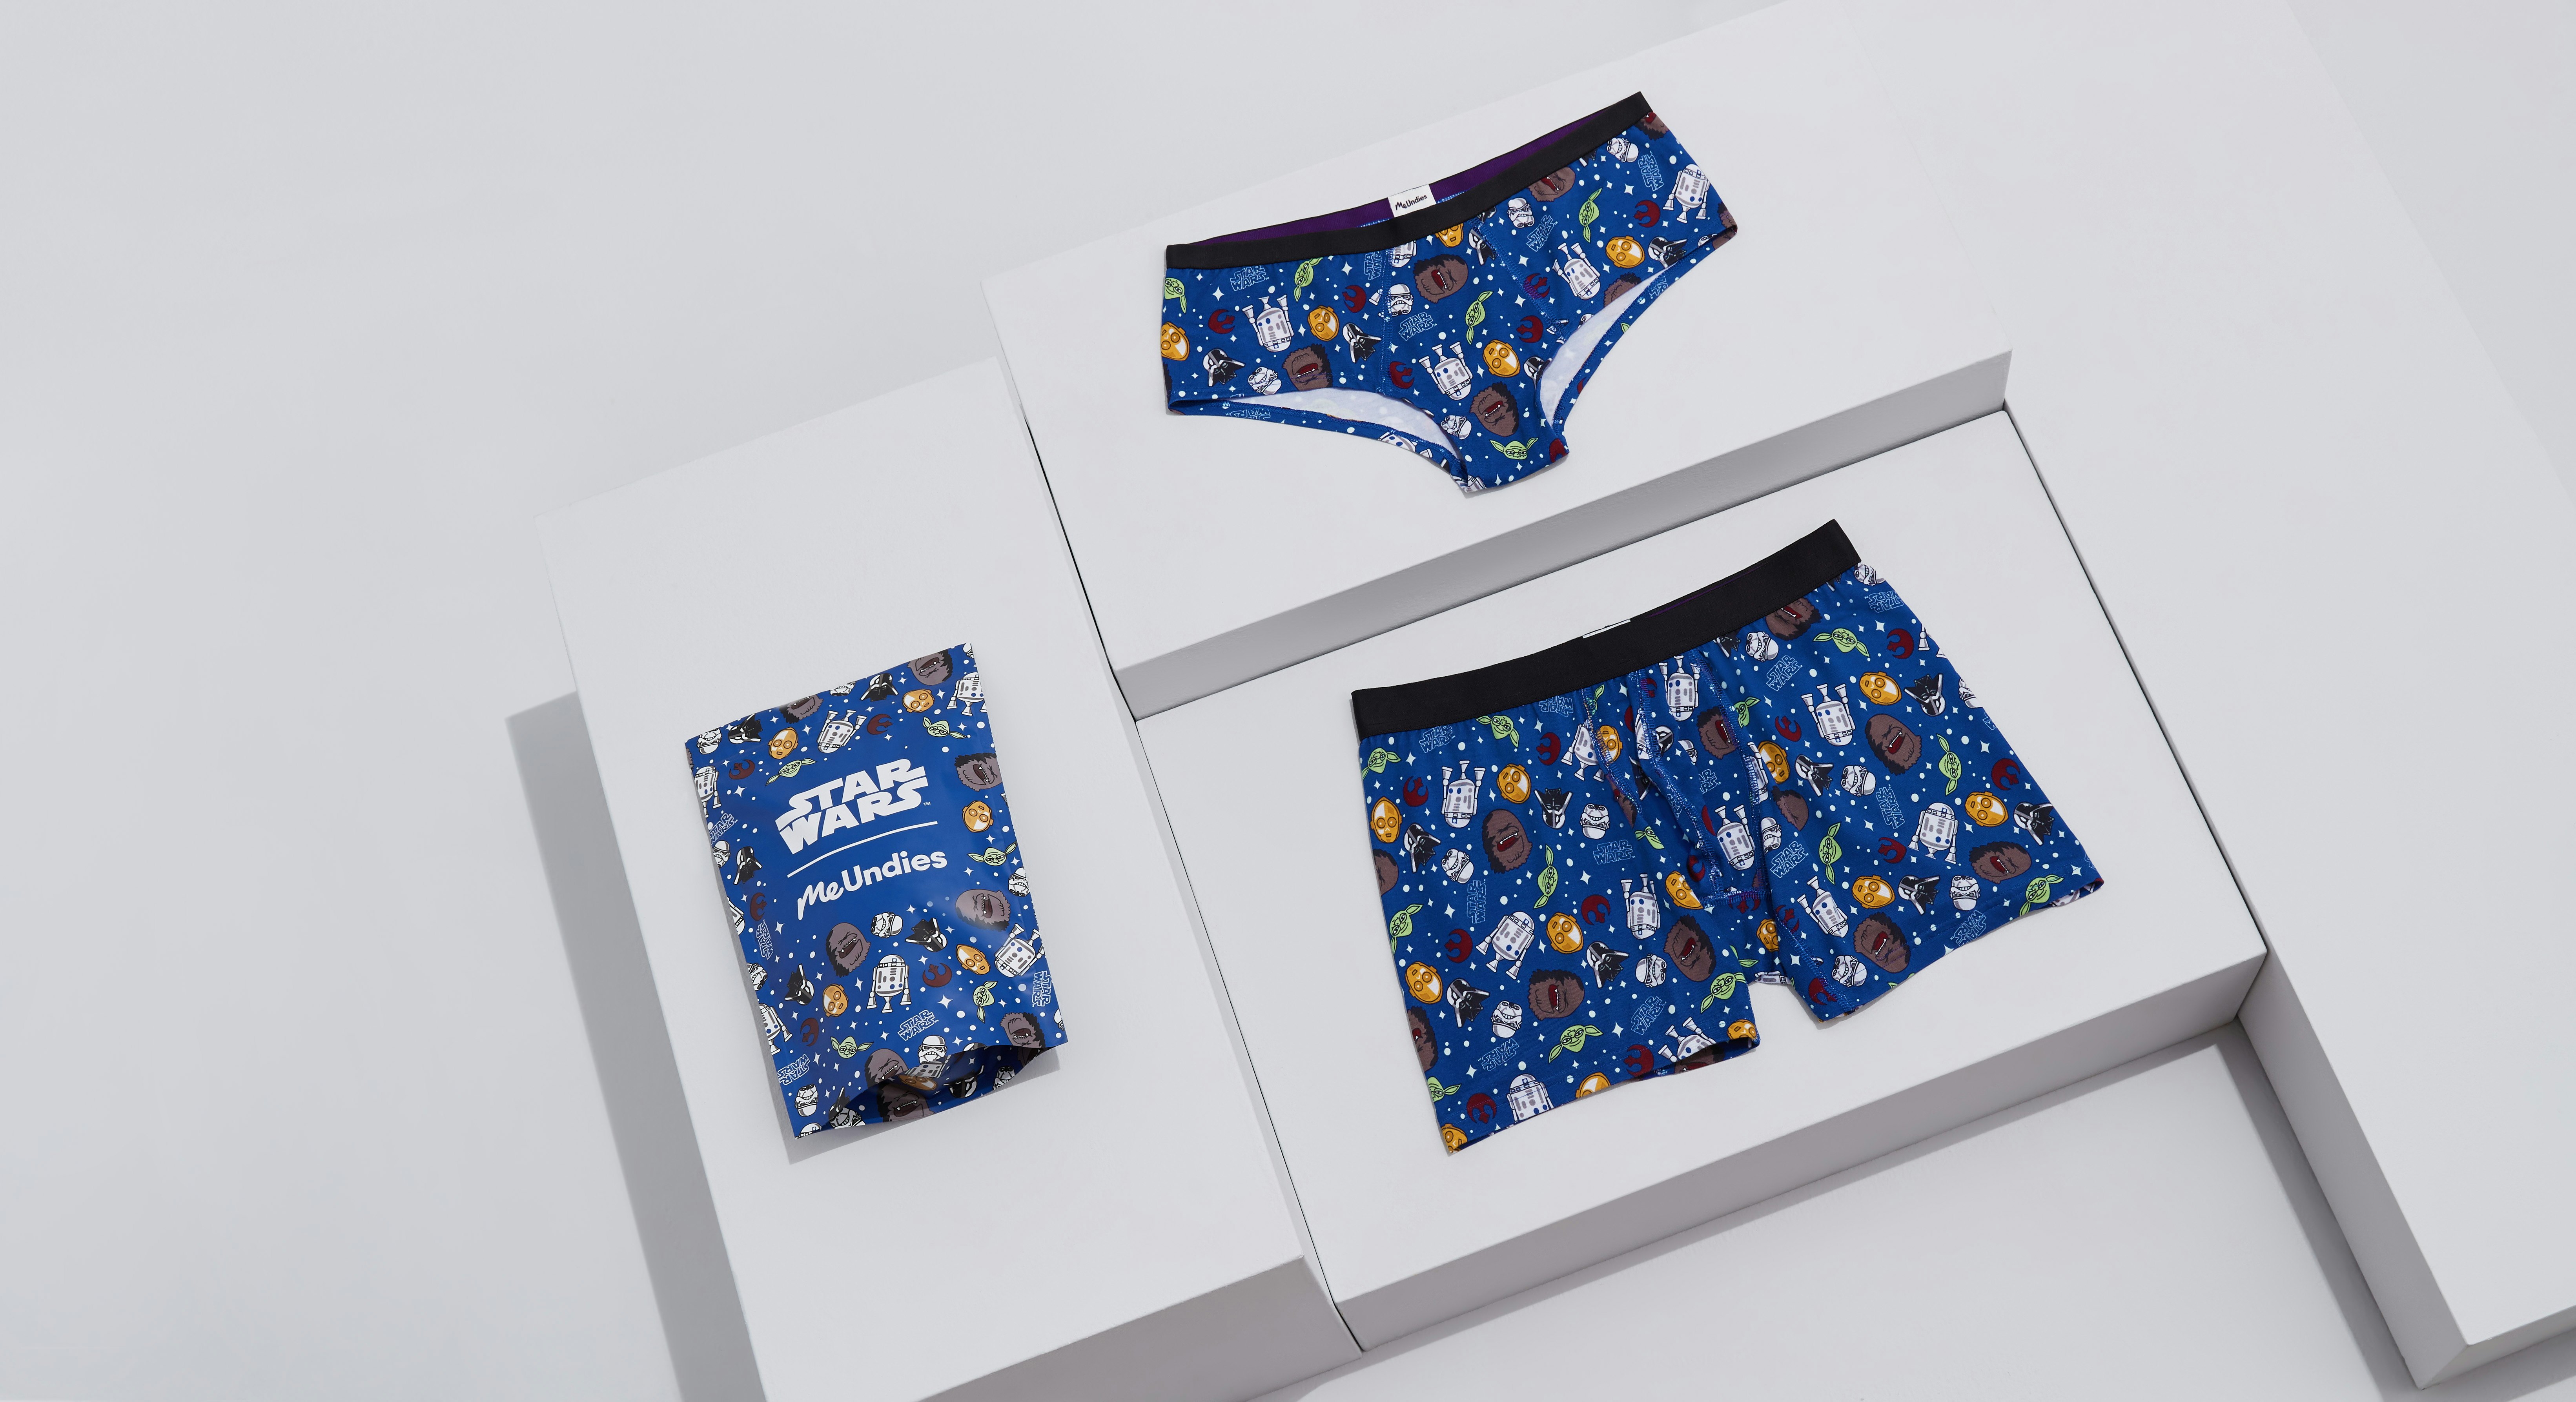 Where To Buy Glow-In-The-Dark 'Star Wars' MeUndies Because They're The  Coolest Underwear In The Galaxy